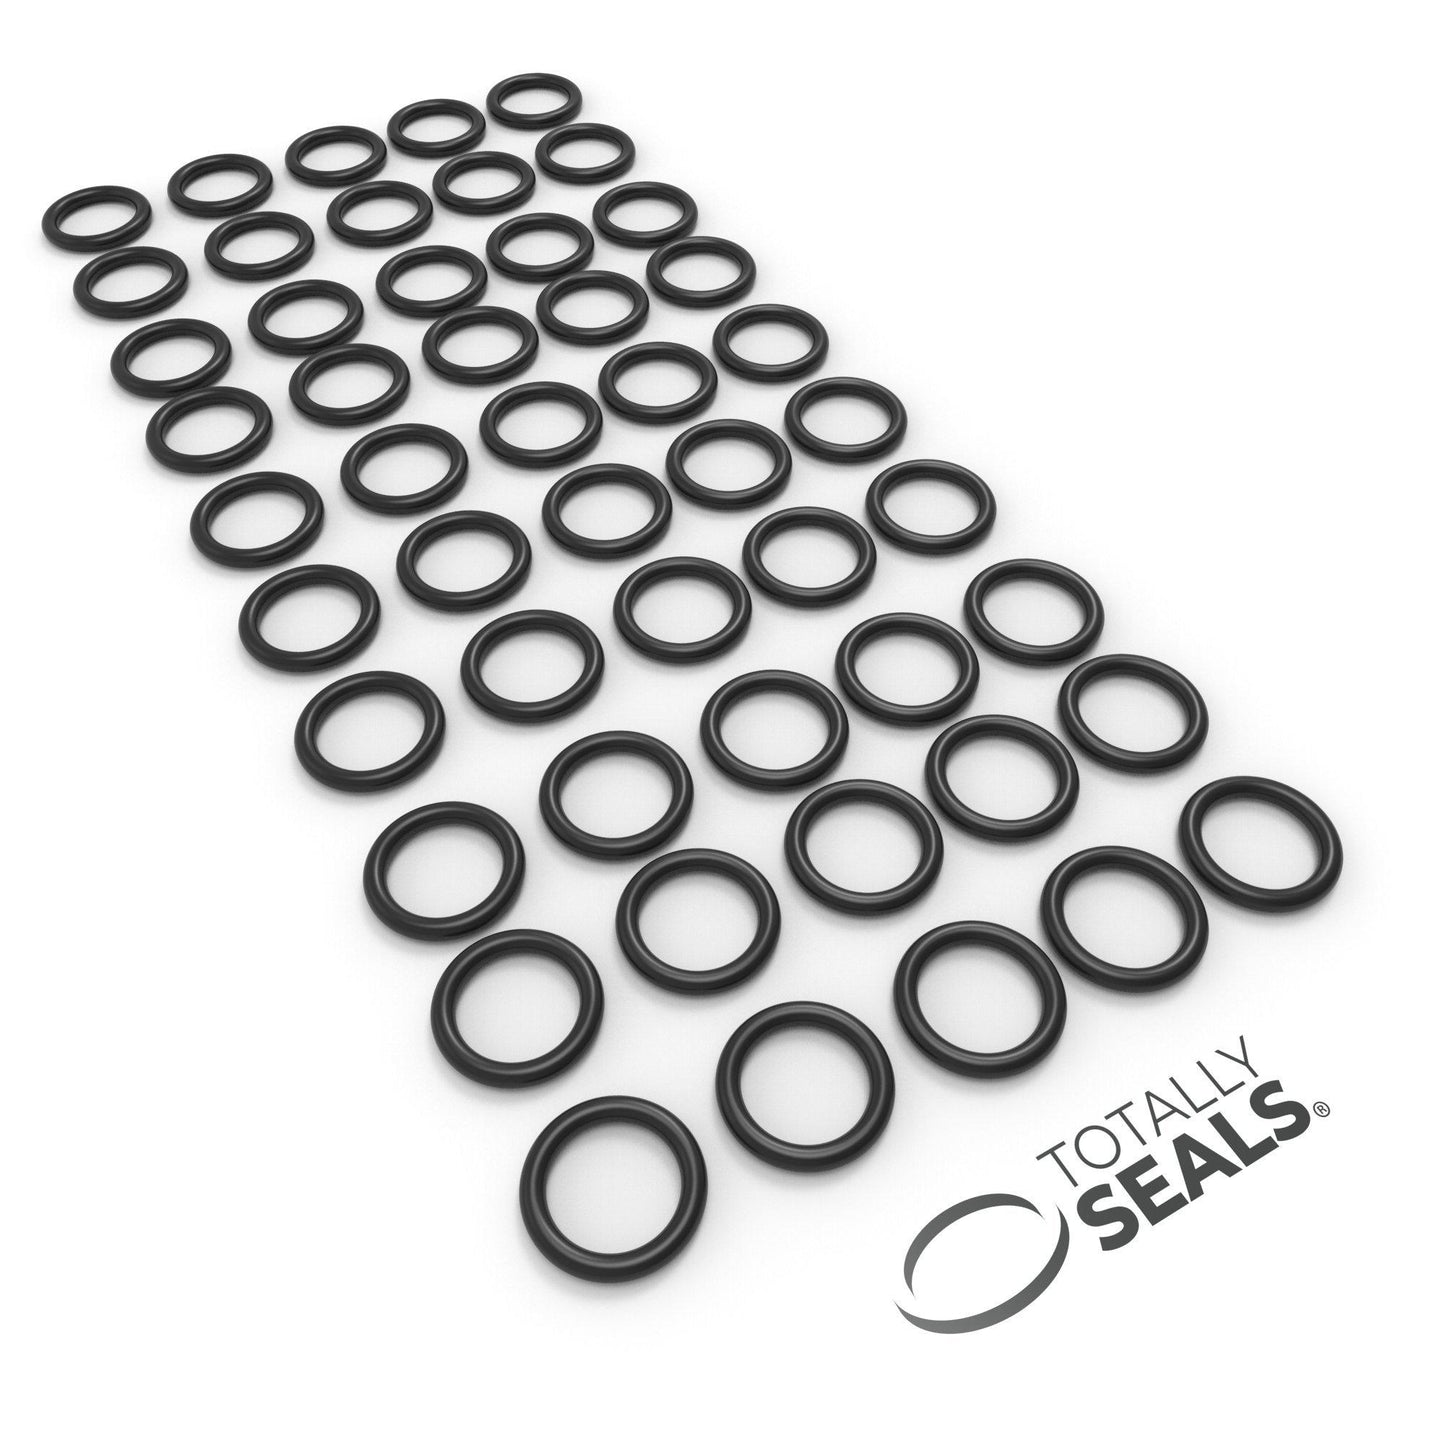 26mm x 1.5mm (29mm OD) Nitrile O-Rings - Totally Seals®